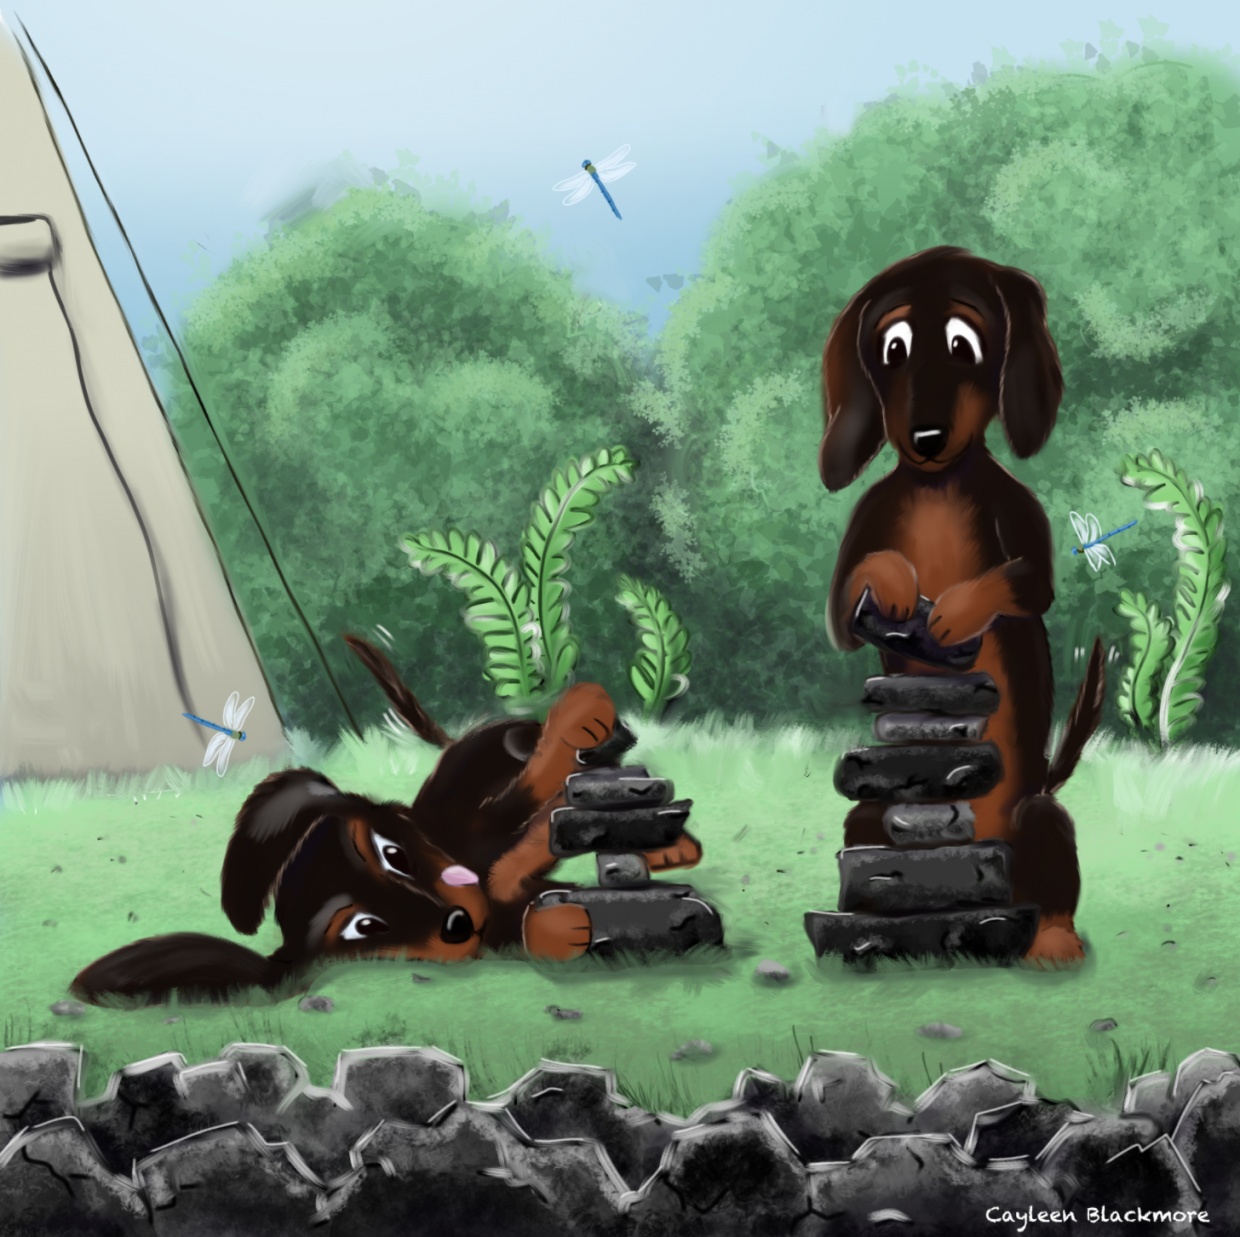 dachshund puppy dogs playing with rocks while camping